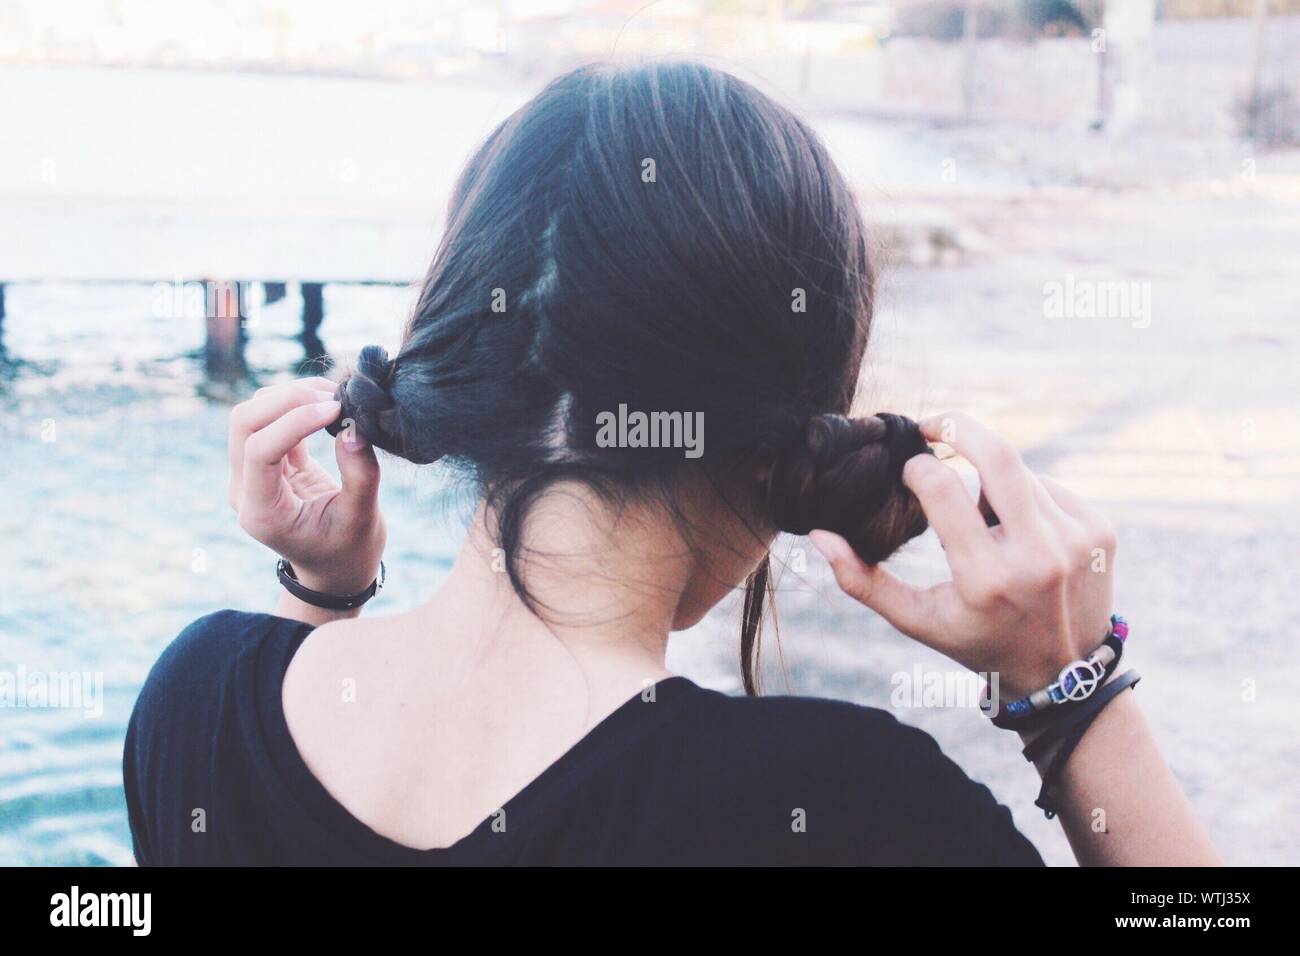 Rear View Of Woman Holding Pigtails Stock Photo